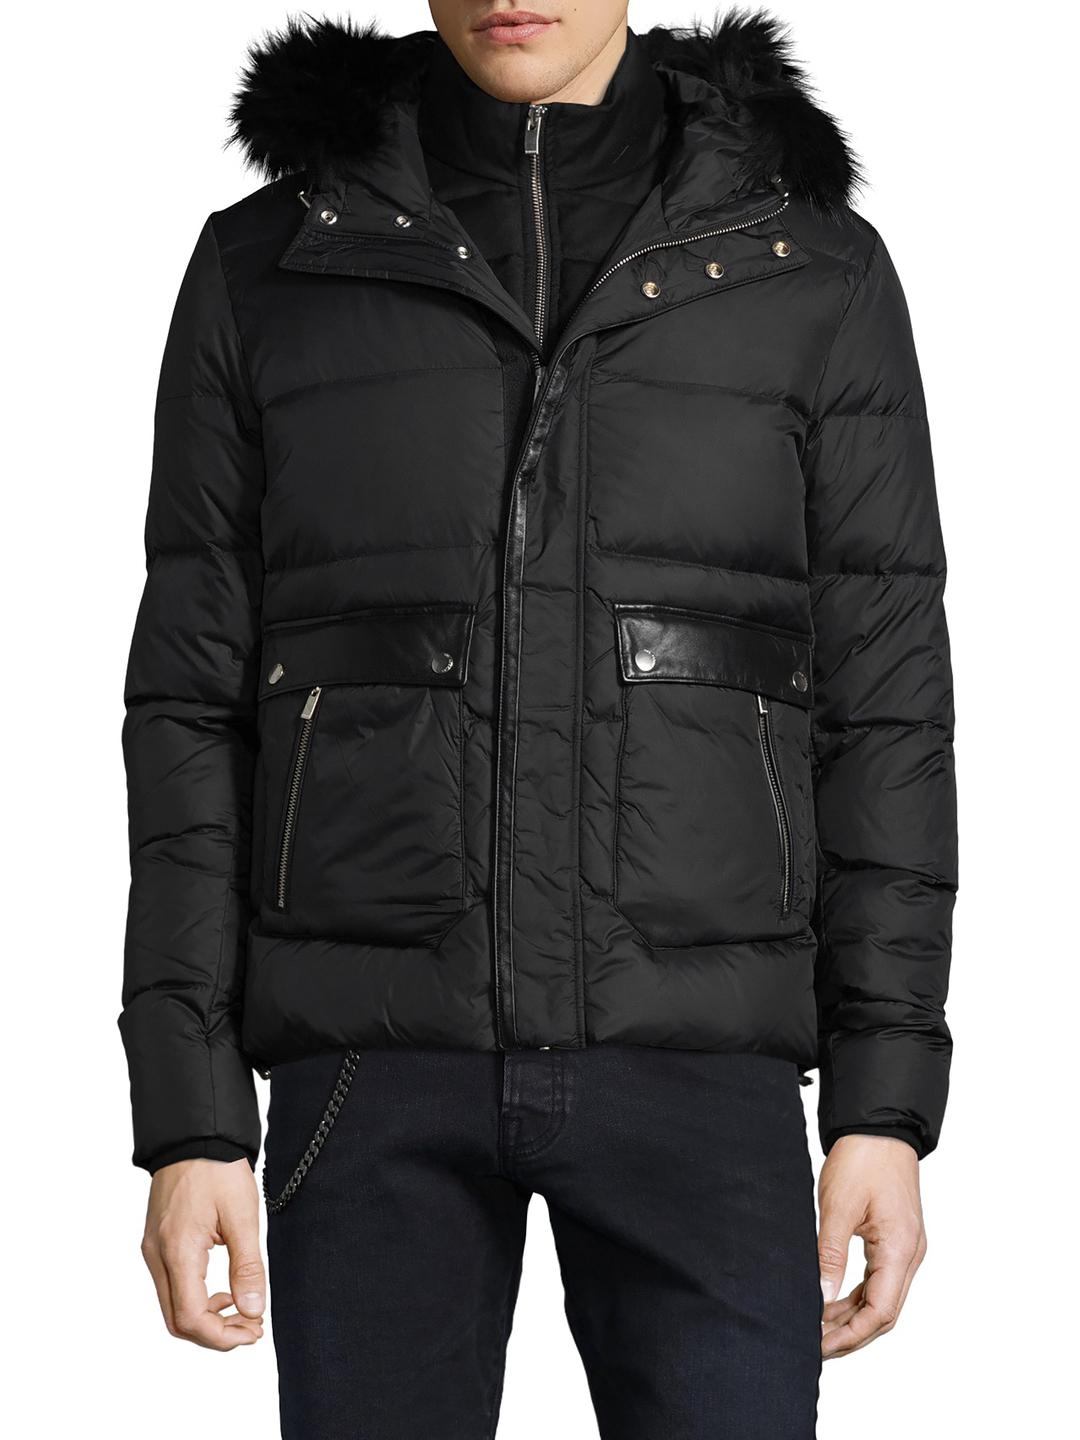 The Kooples Quilted Fur Puffer Jacket in Black for Men - Lyst